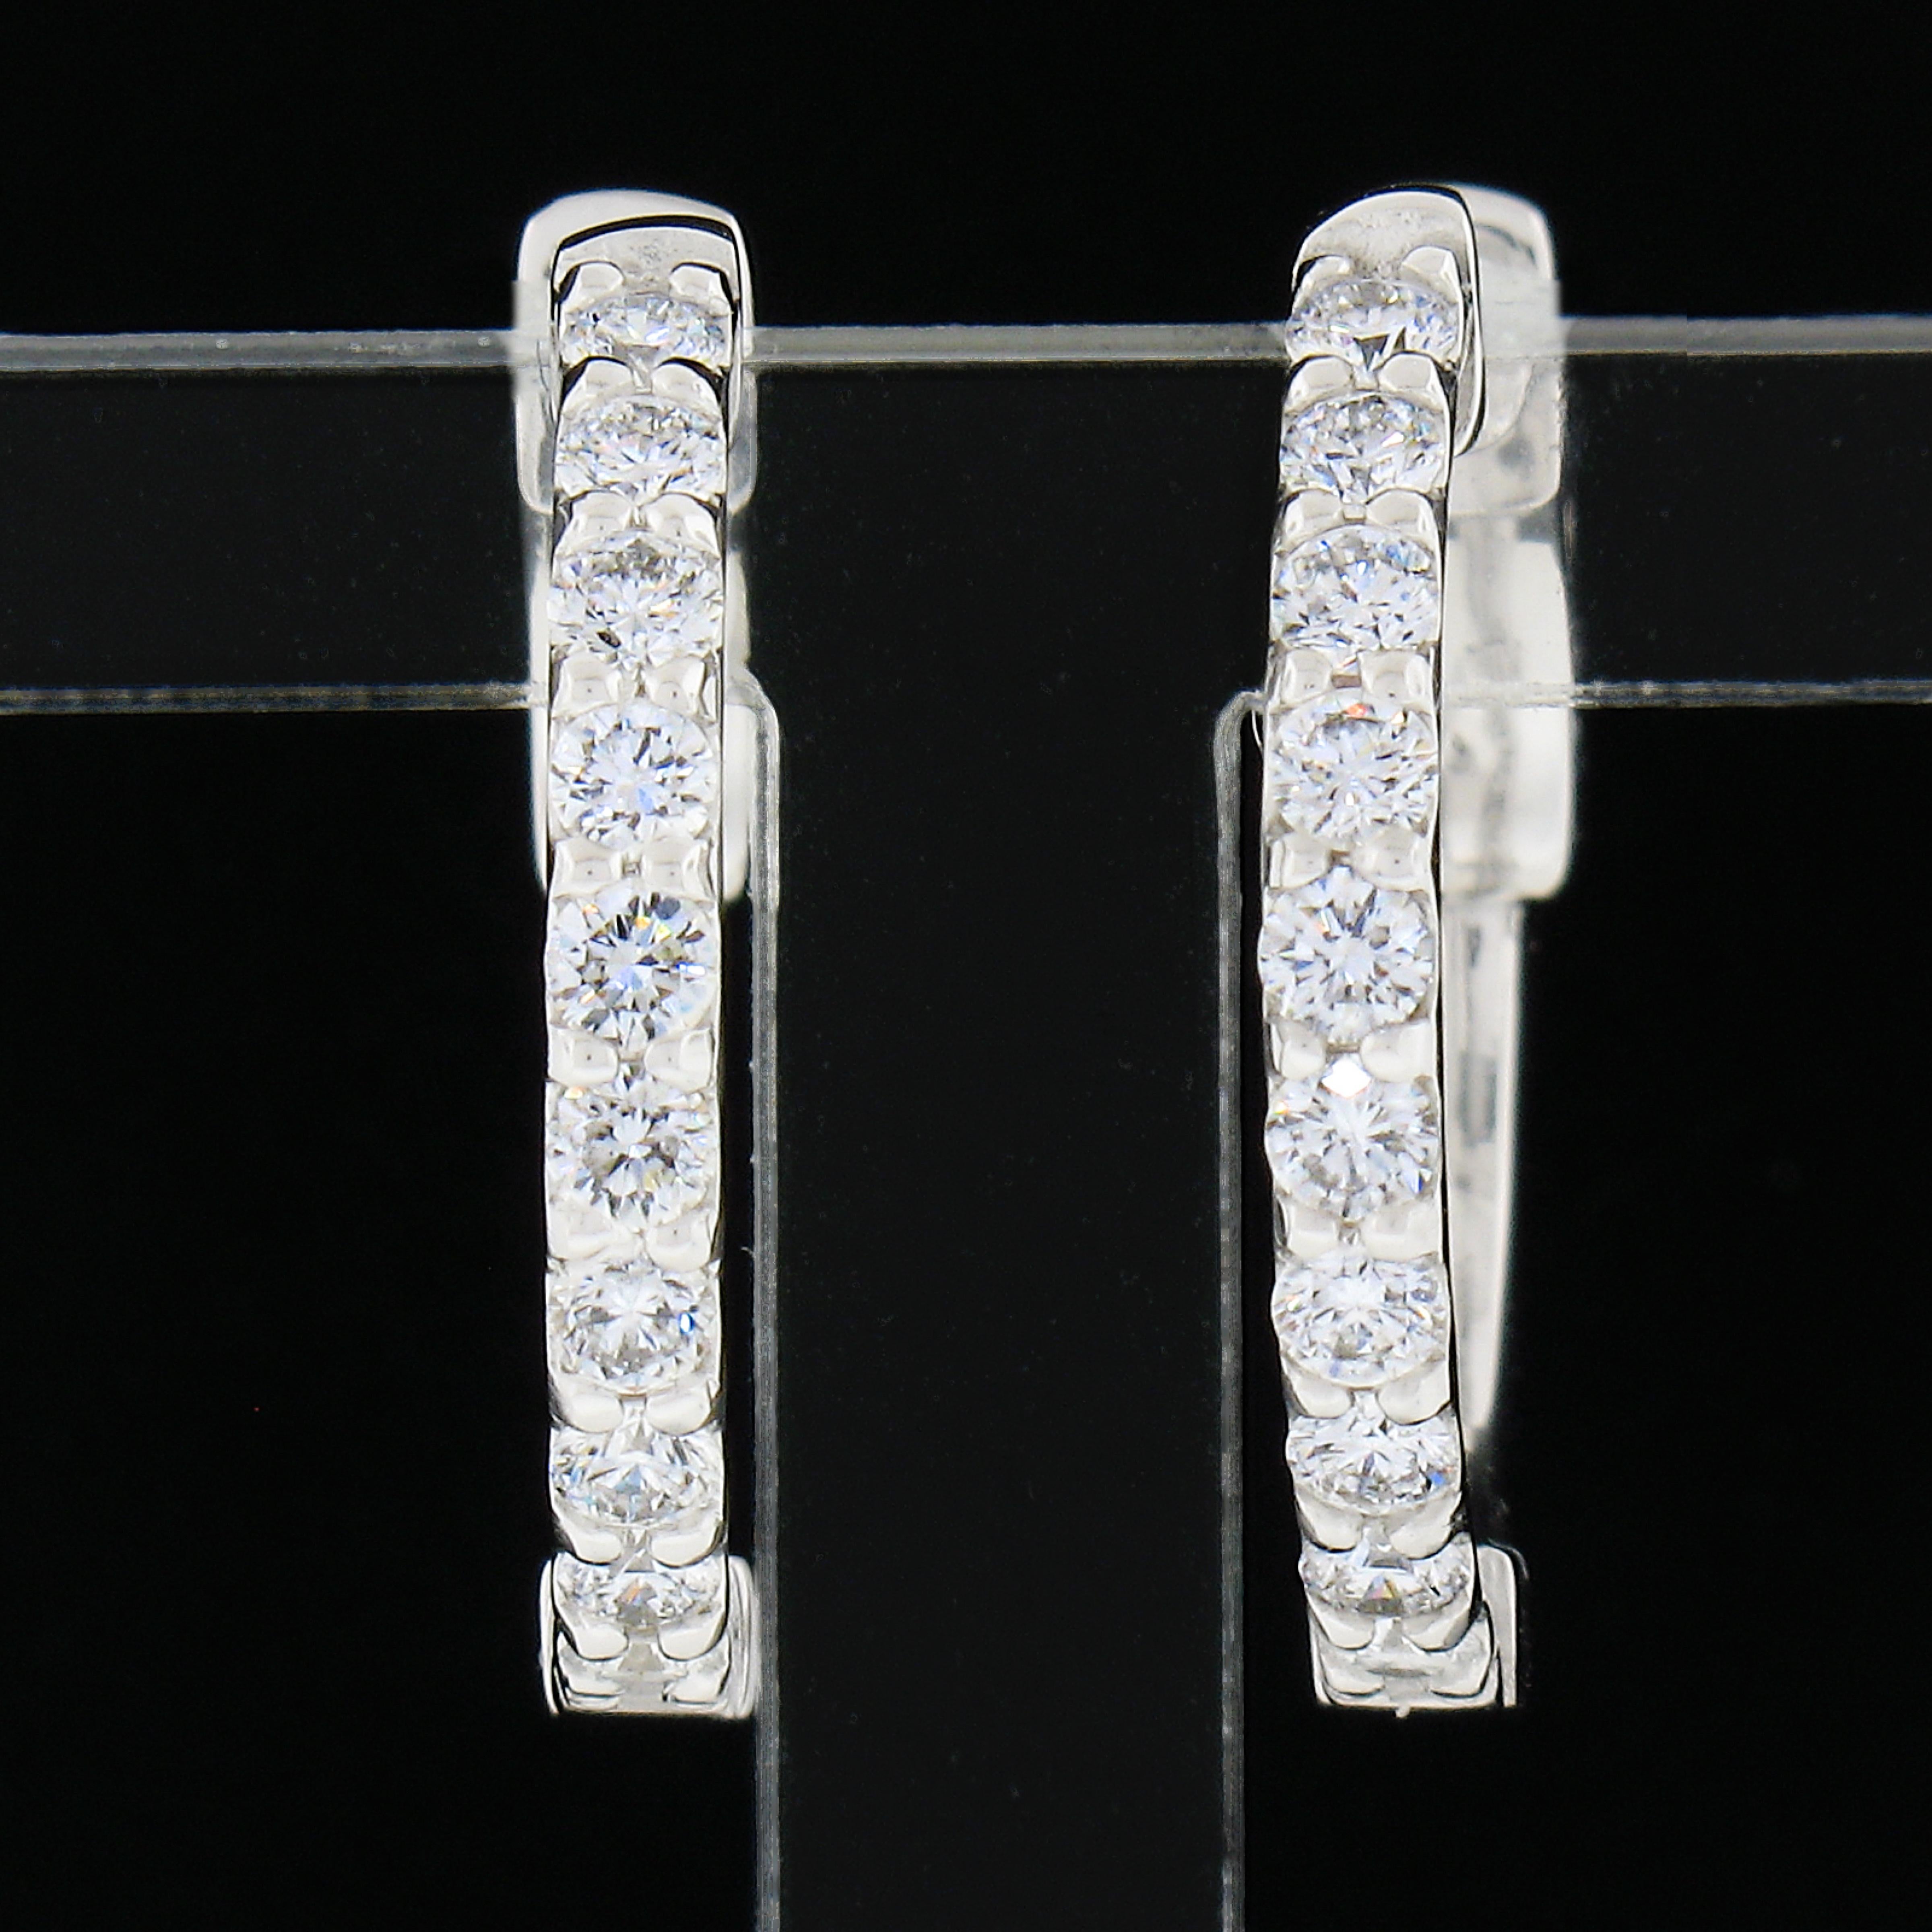 This classic pair of hoop earrings was newly crafted in solid 14k white gold and features exactly 0.60 carats of round brilliant cut diamonds. These fiery diamonds are neatly shared-prong set across the front side in sets of 10. They sparkle very